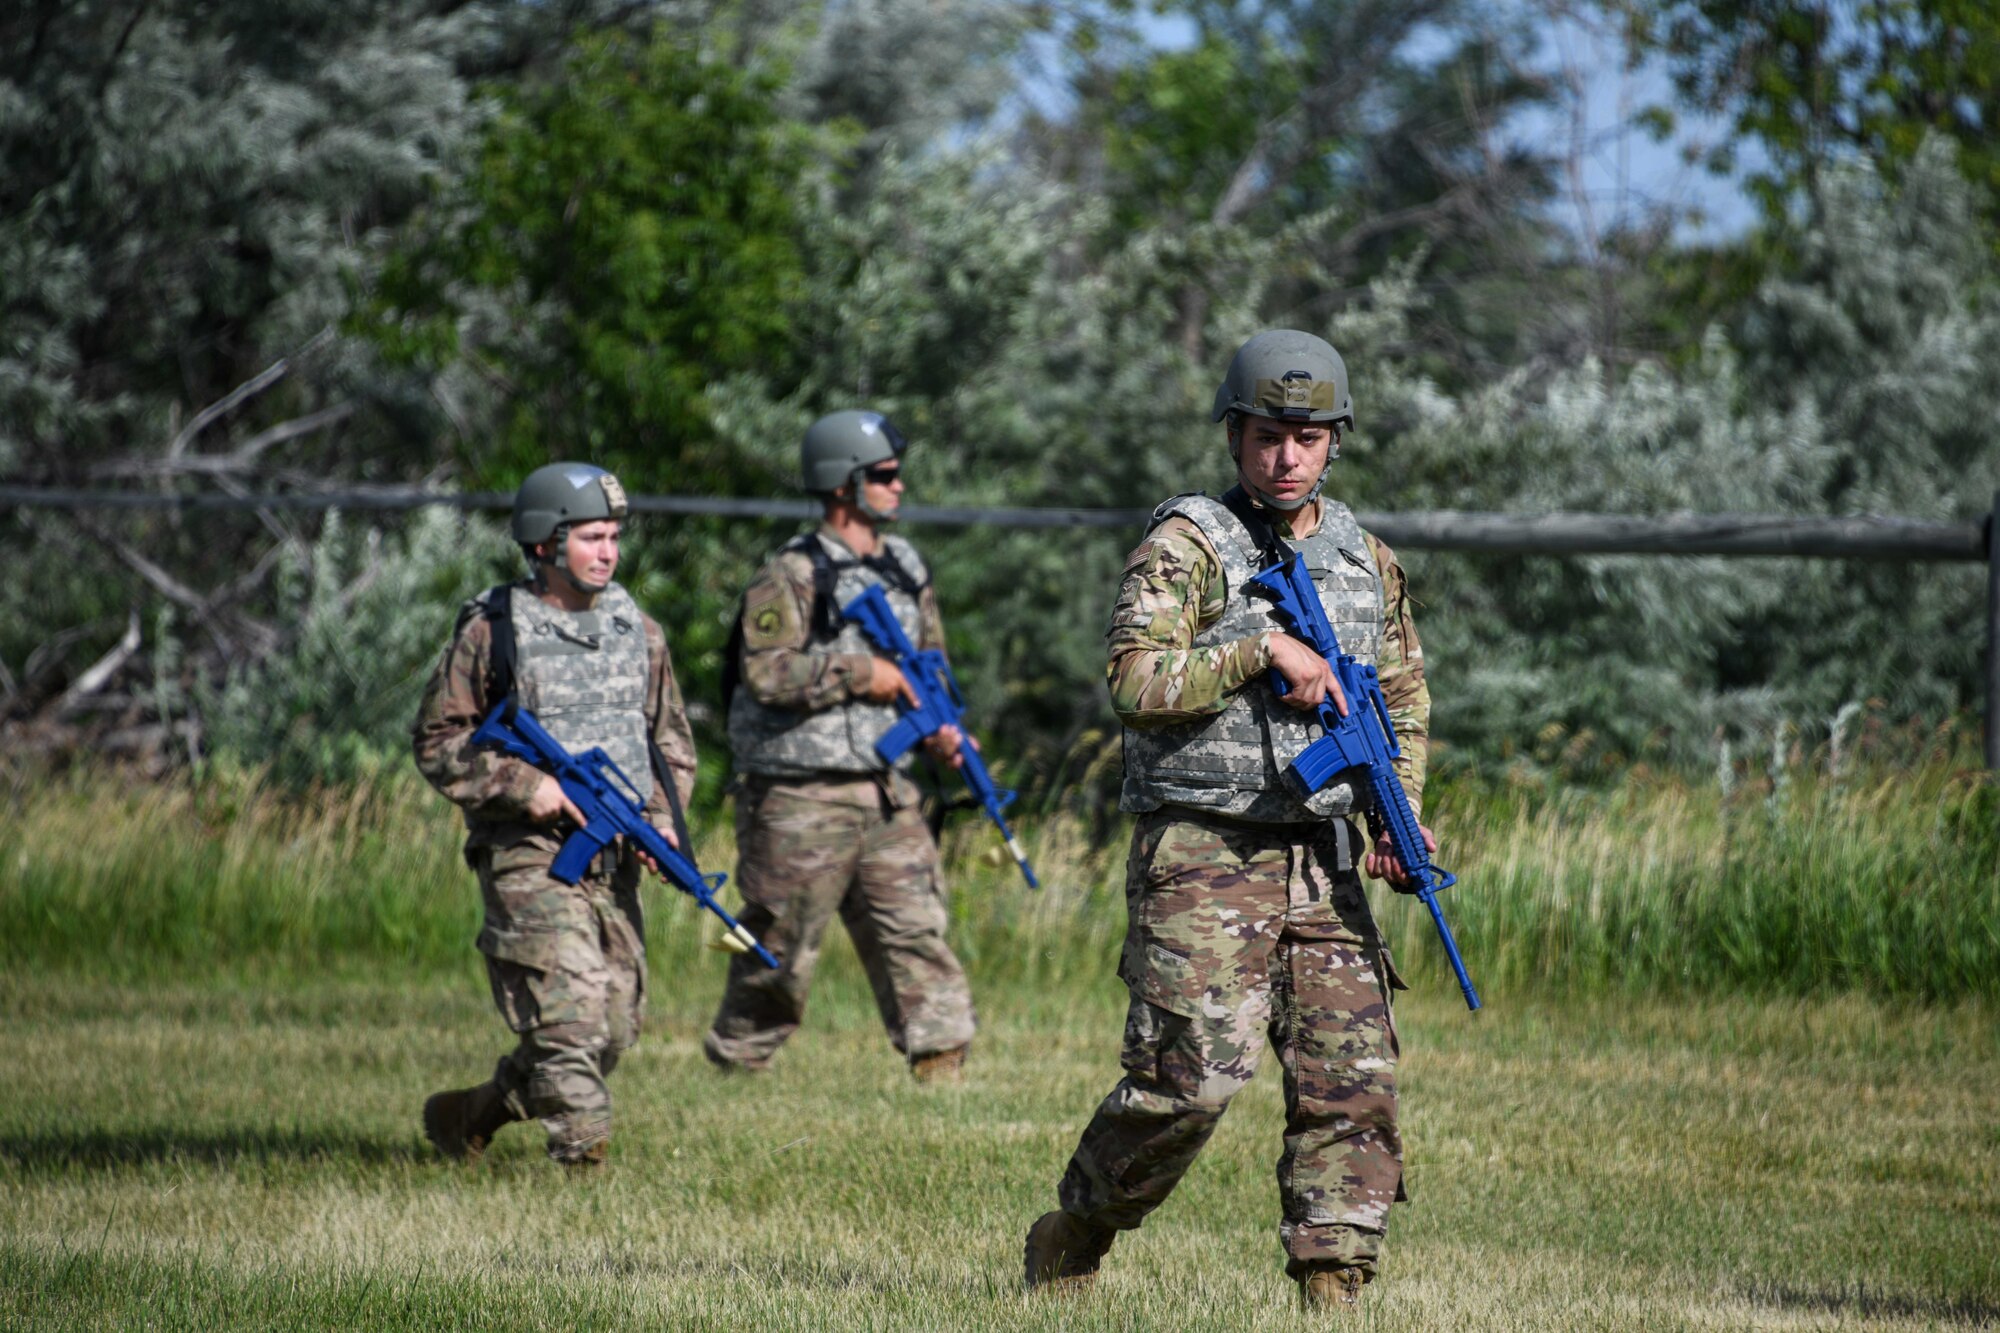 Airmen from the 319th Civil Engineer Squadron practice troop movements during a Prime Base Engineer Emergency Force training on Grand Forks Air Force Base, North Dakota, July 14, 2022. The Prime BEEF training allowed Airmen to exercise and conduct operations down range, which included hands-on training such as land navigation, troop movement, and tactical combat casualty care. (U.S. Air Force photo by Senior Airman Ashley Richards)